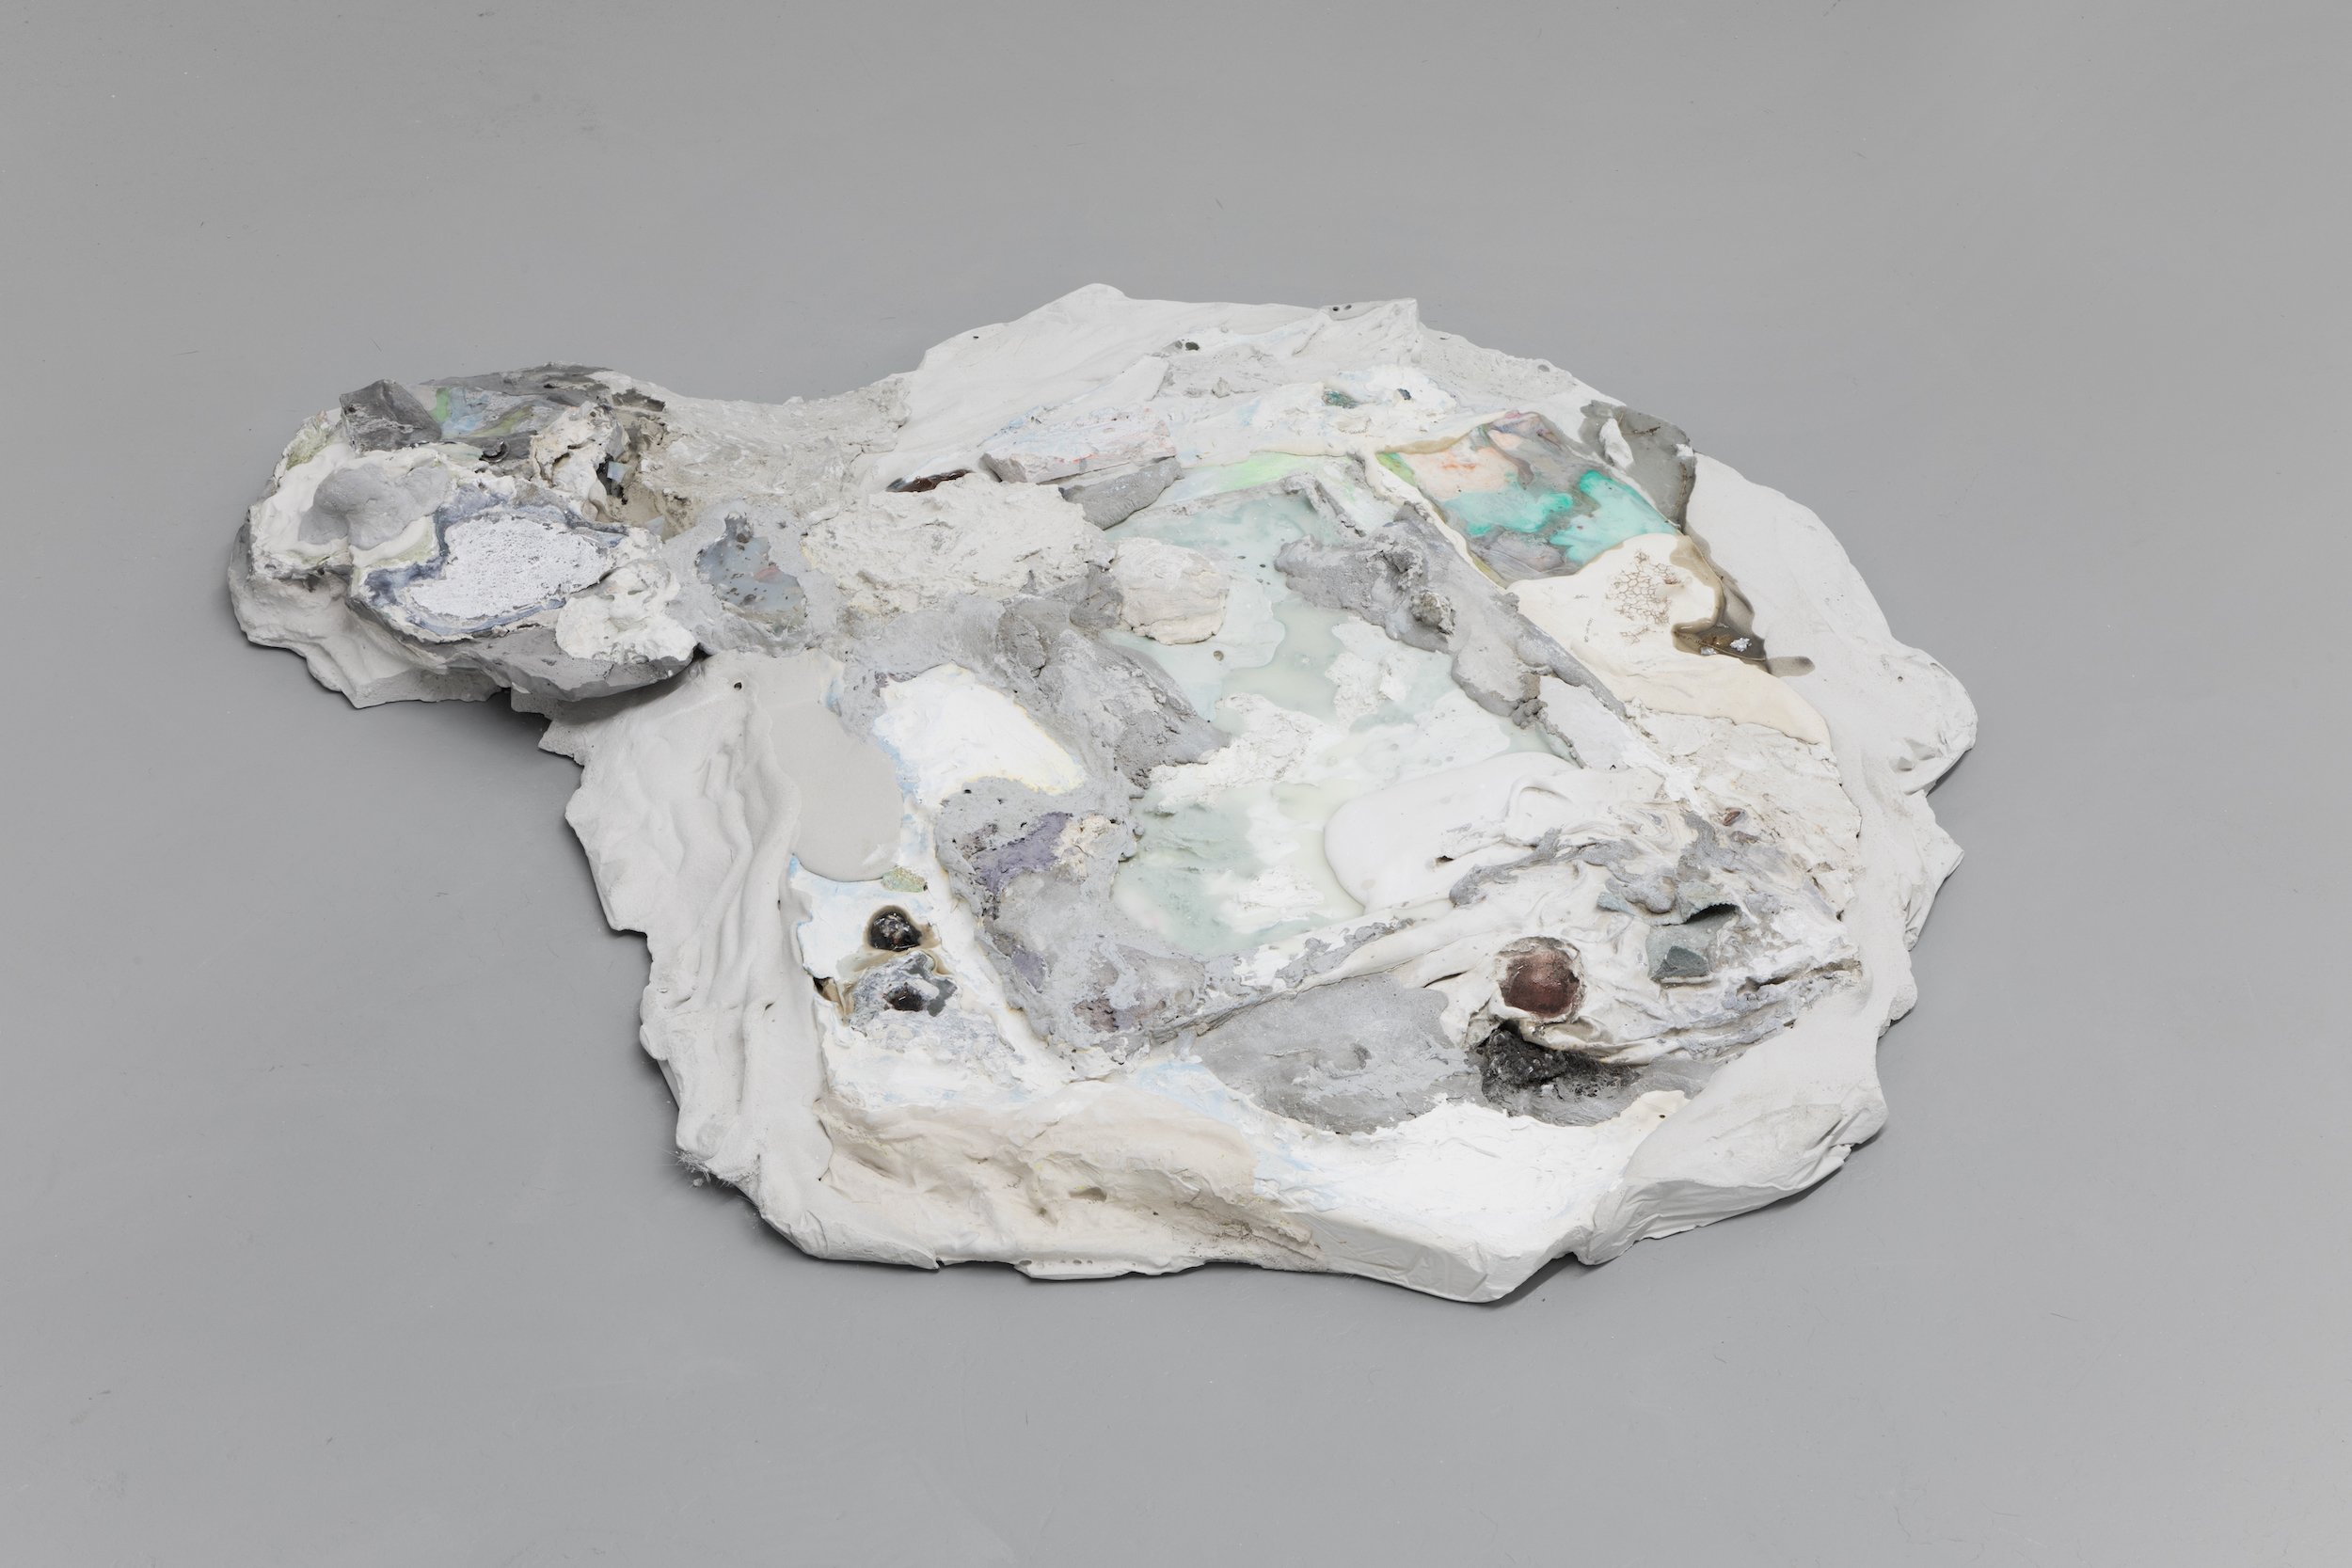  Laur P,  Us that were never down to earth, us who knew nothing of stasis , 2024, Painting from 2016 (oil on wood panel), watercolour, acrylic and aluminum leaf on paper, plaster, cement, paper pulp, dry pigments, epoxy resin, soy wax, unfired clay, 